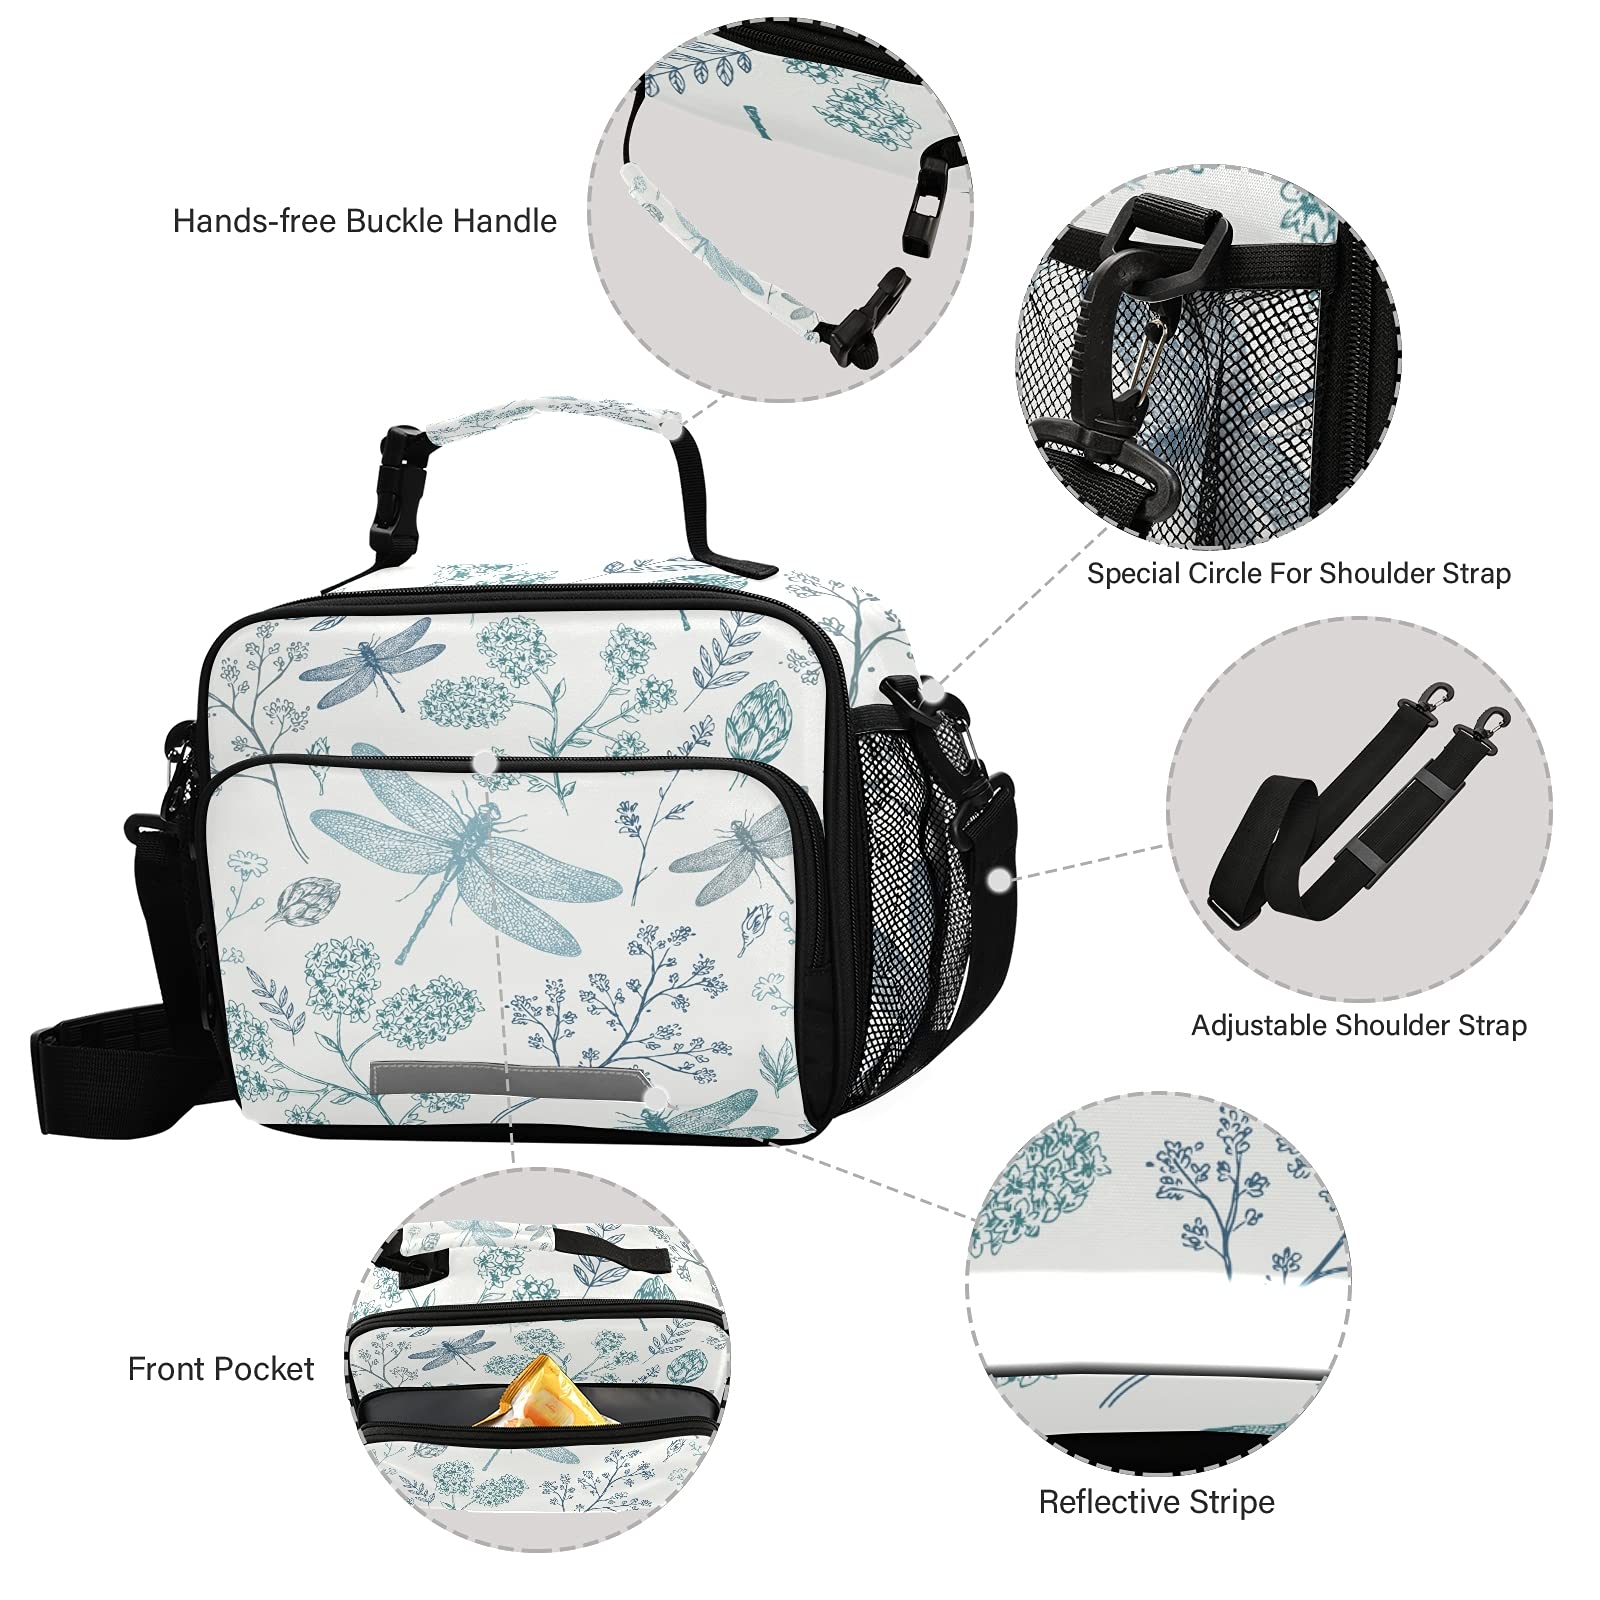 Blueangle Retro Dragonfly Print Insulated Lunch Bag with Detachable Shoulder Strap & Carry Handle, Eco-friendly Cooler Bag Tote Bag,School Lunch Box for Teens,Men,Women